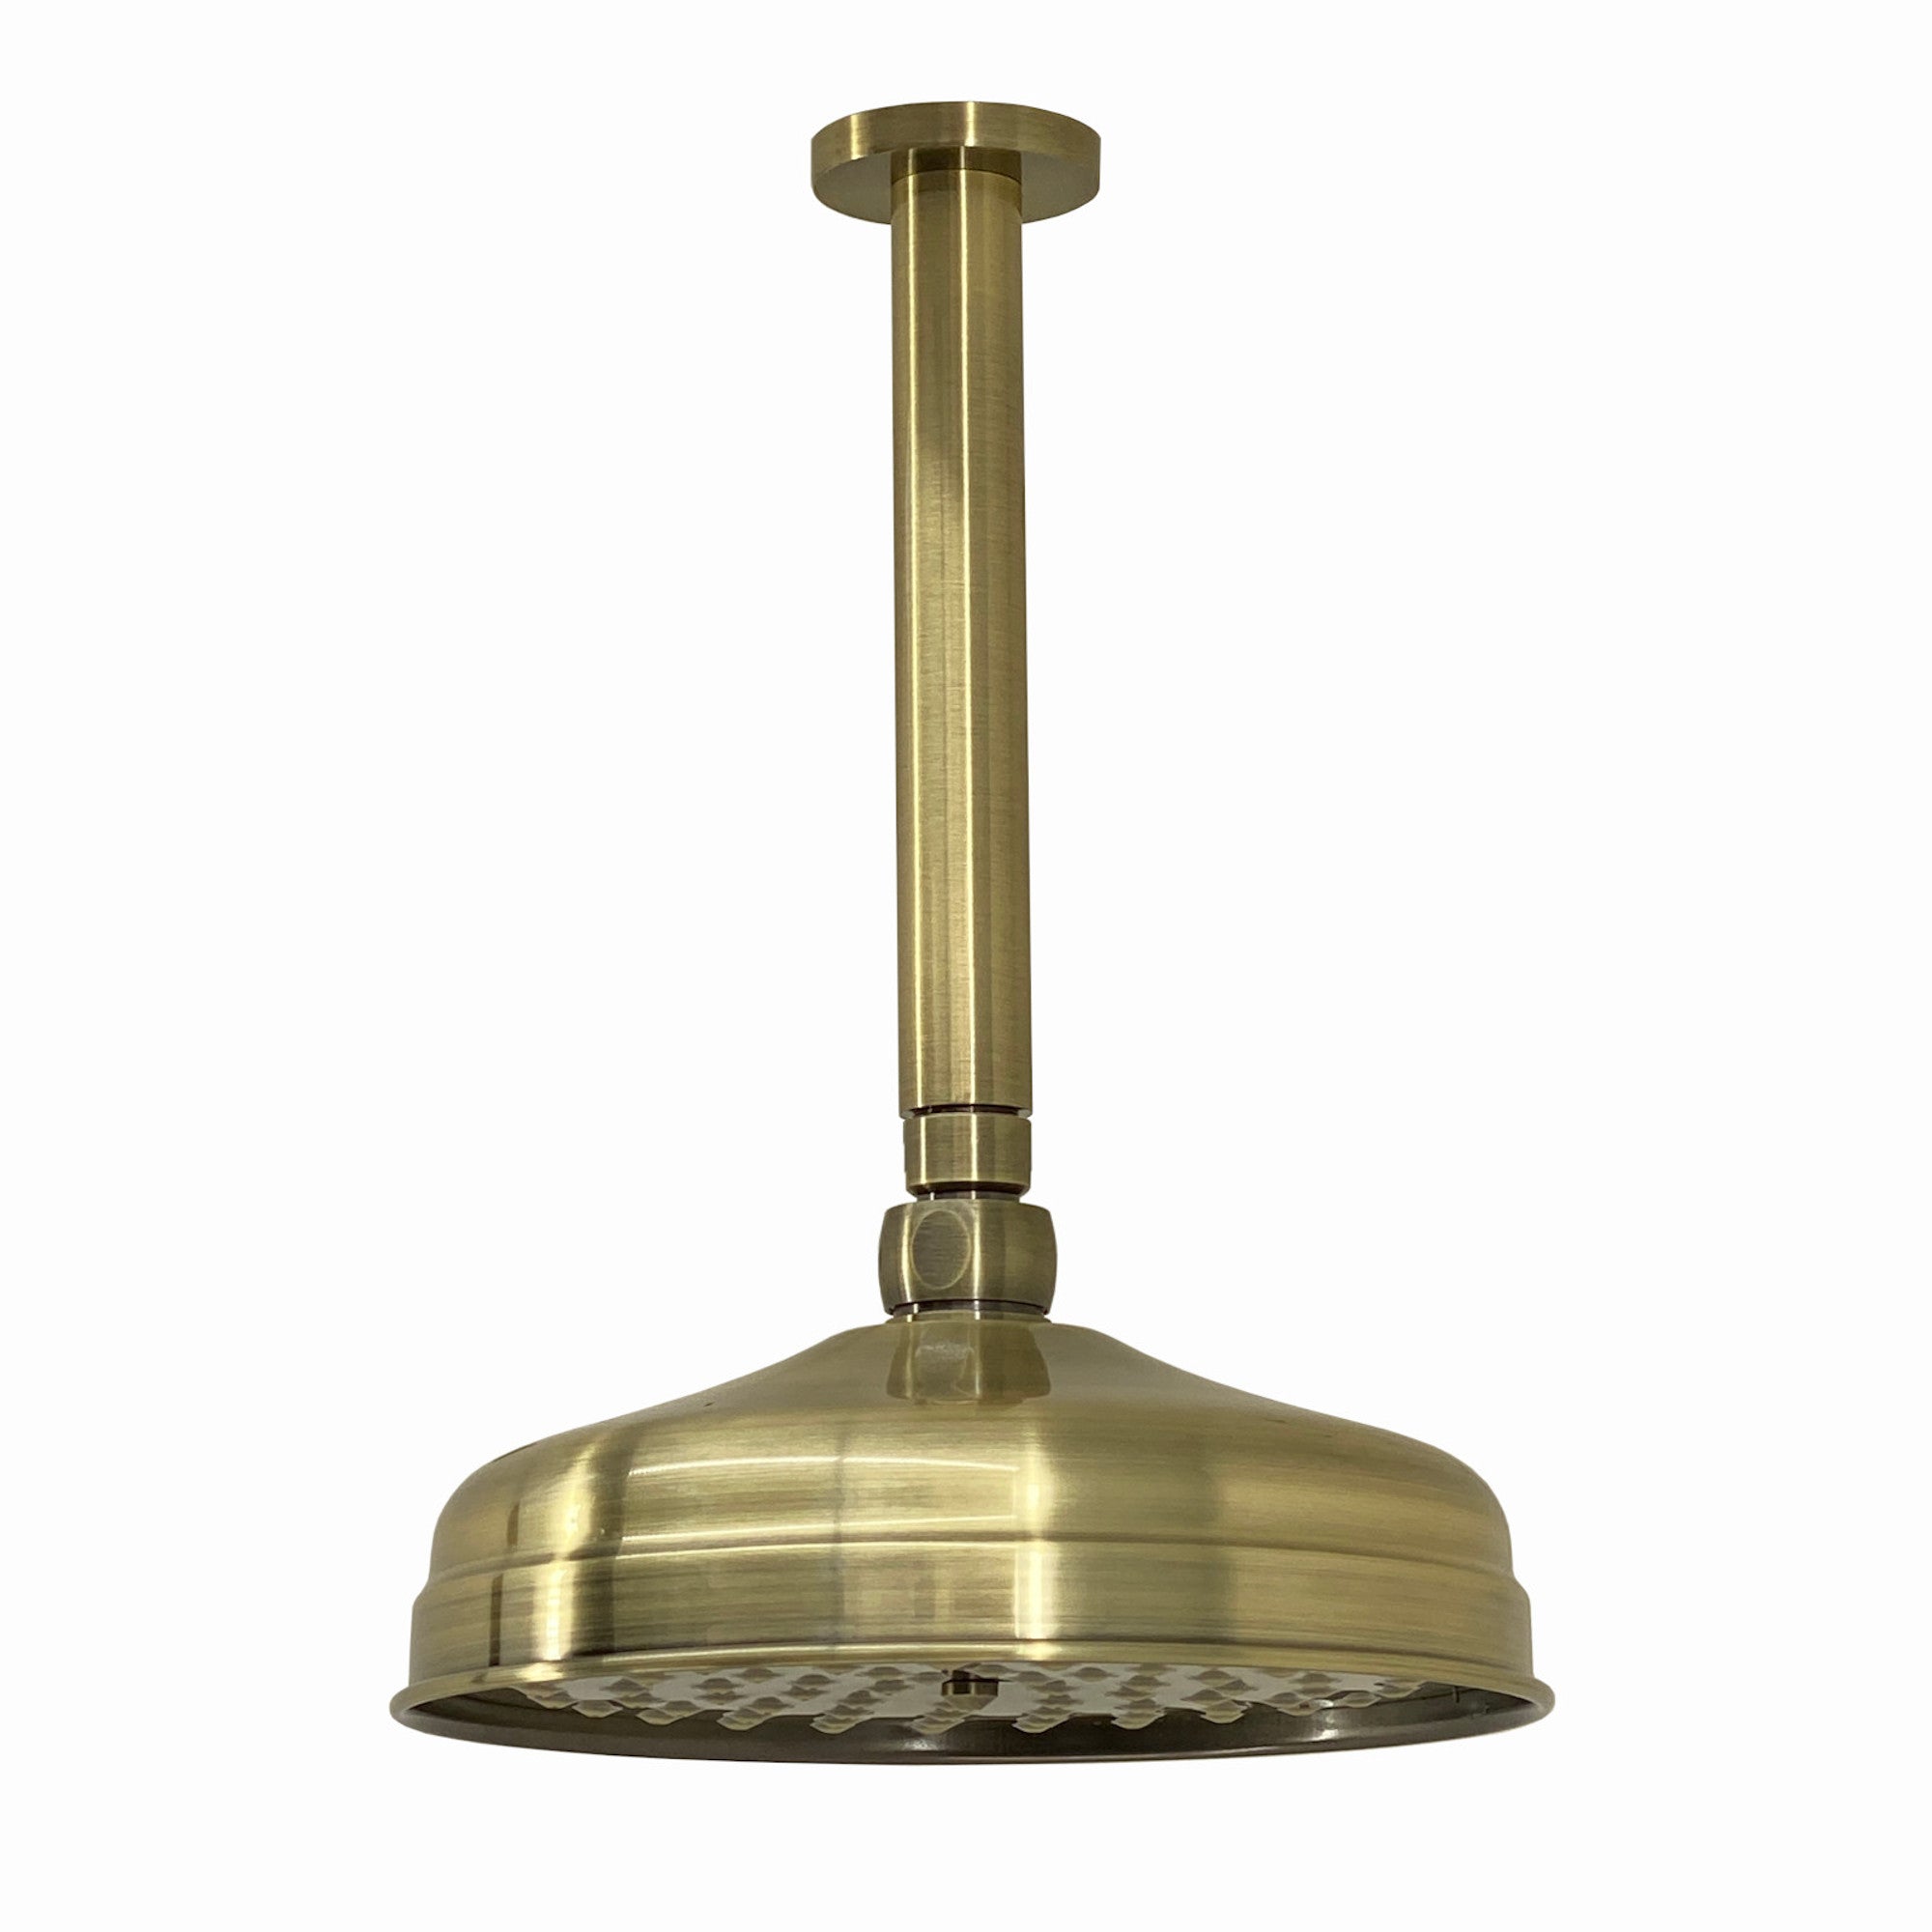 Traditional Ceiling Fixed Apron Brass Shower Head 8" With 180mm Ceiling Shower Arm - Antique Bronze